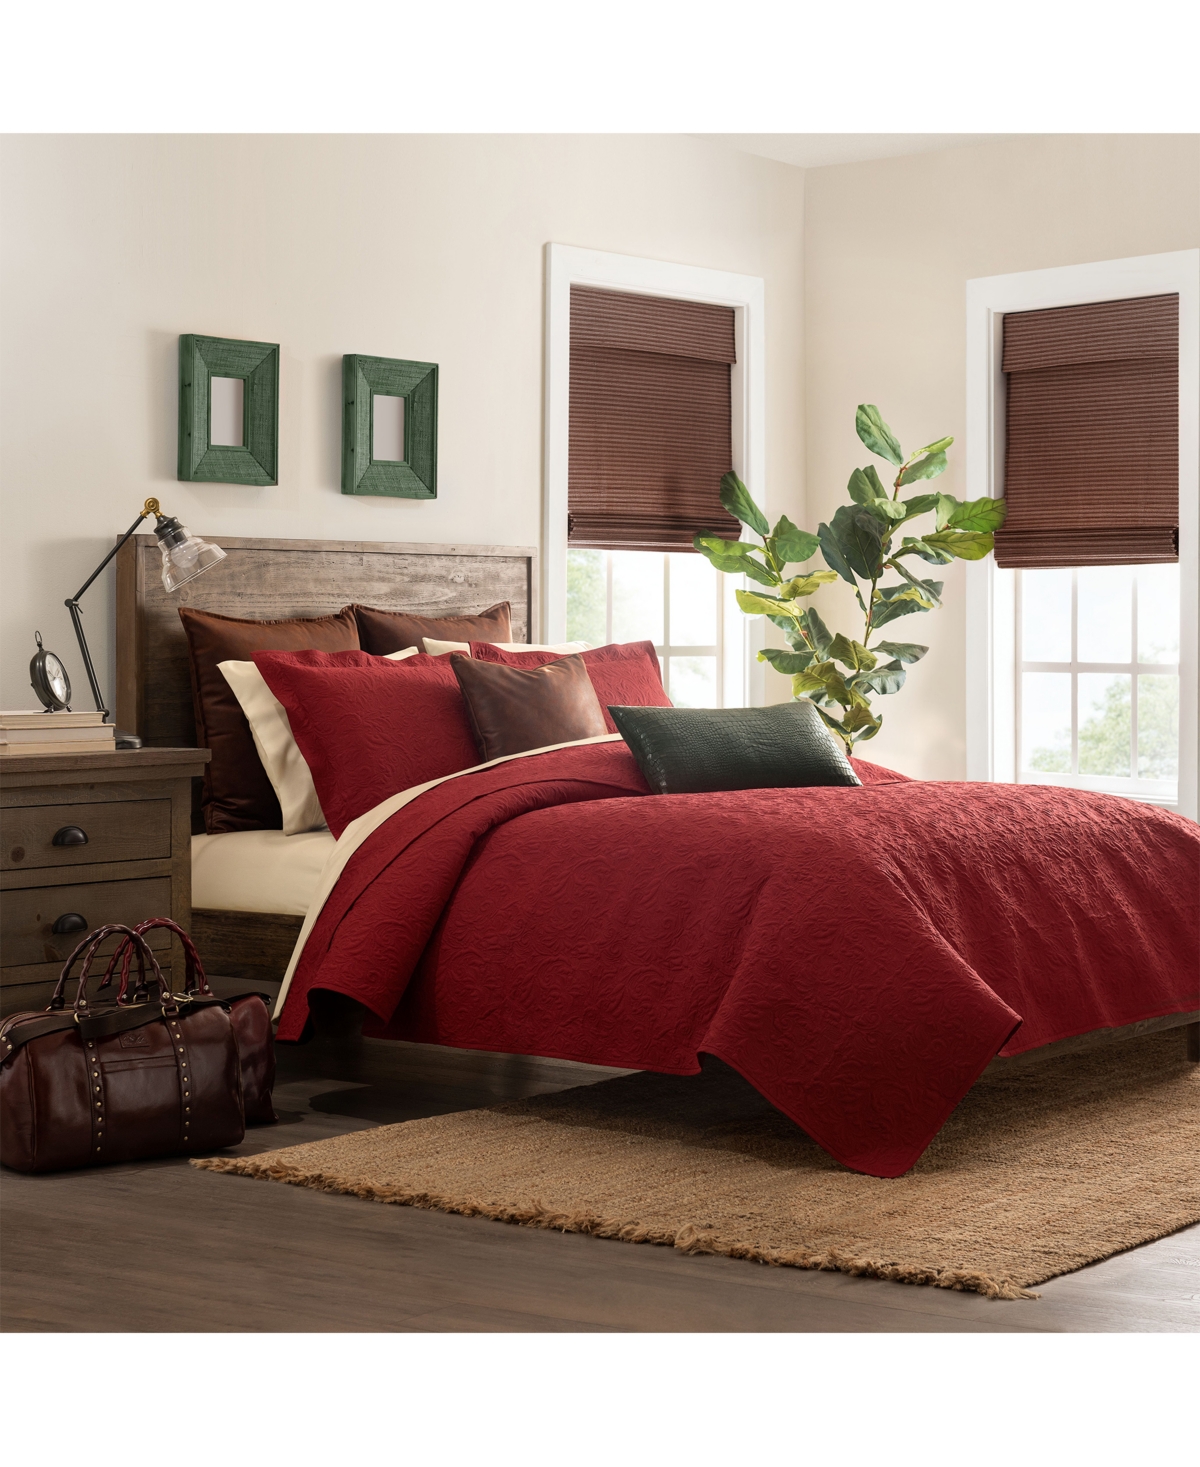 Patricia Nash Classic Tooled 3-piece Quilt Set, Queen In Red